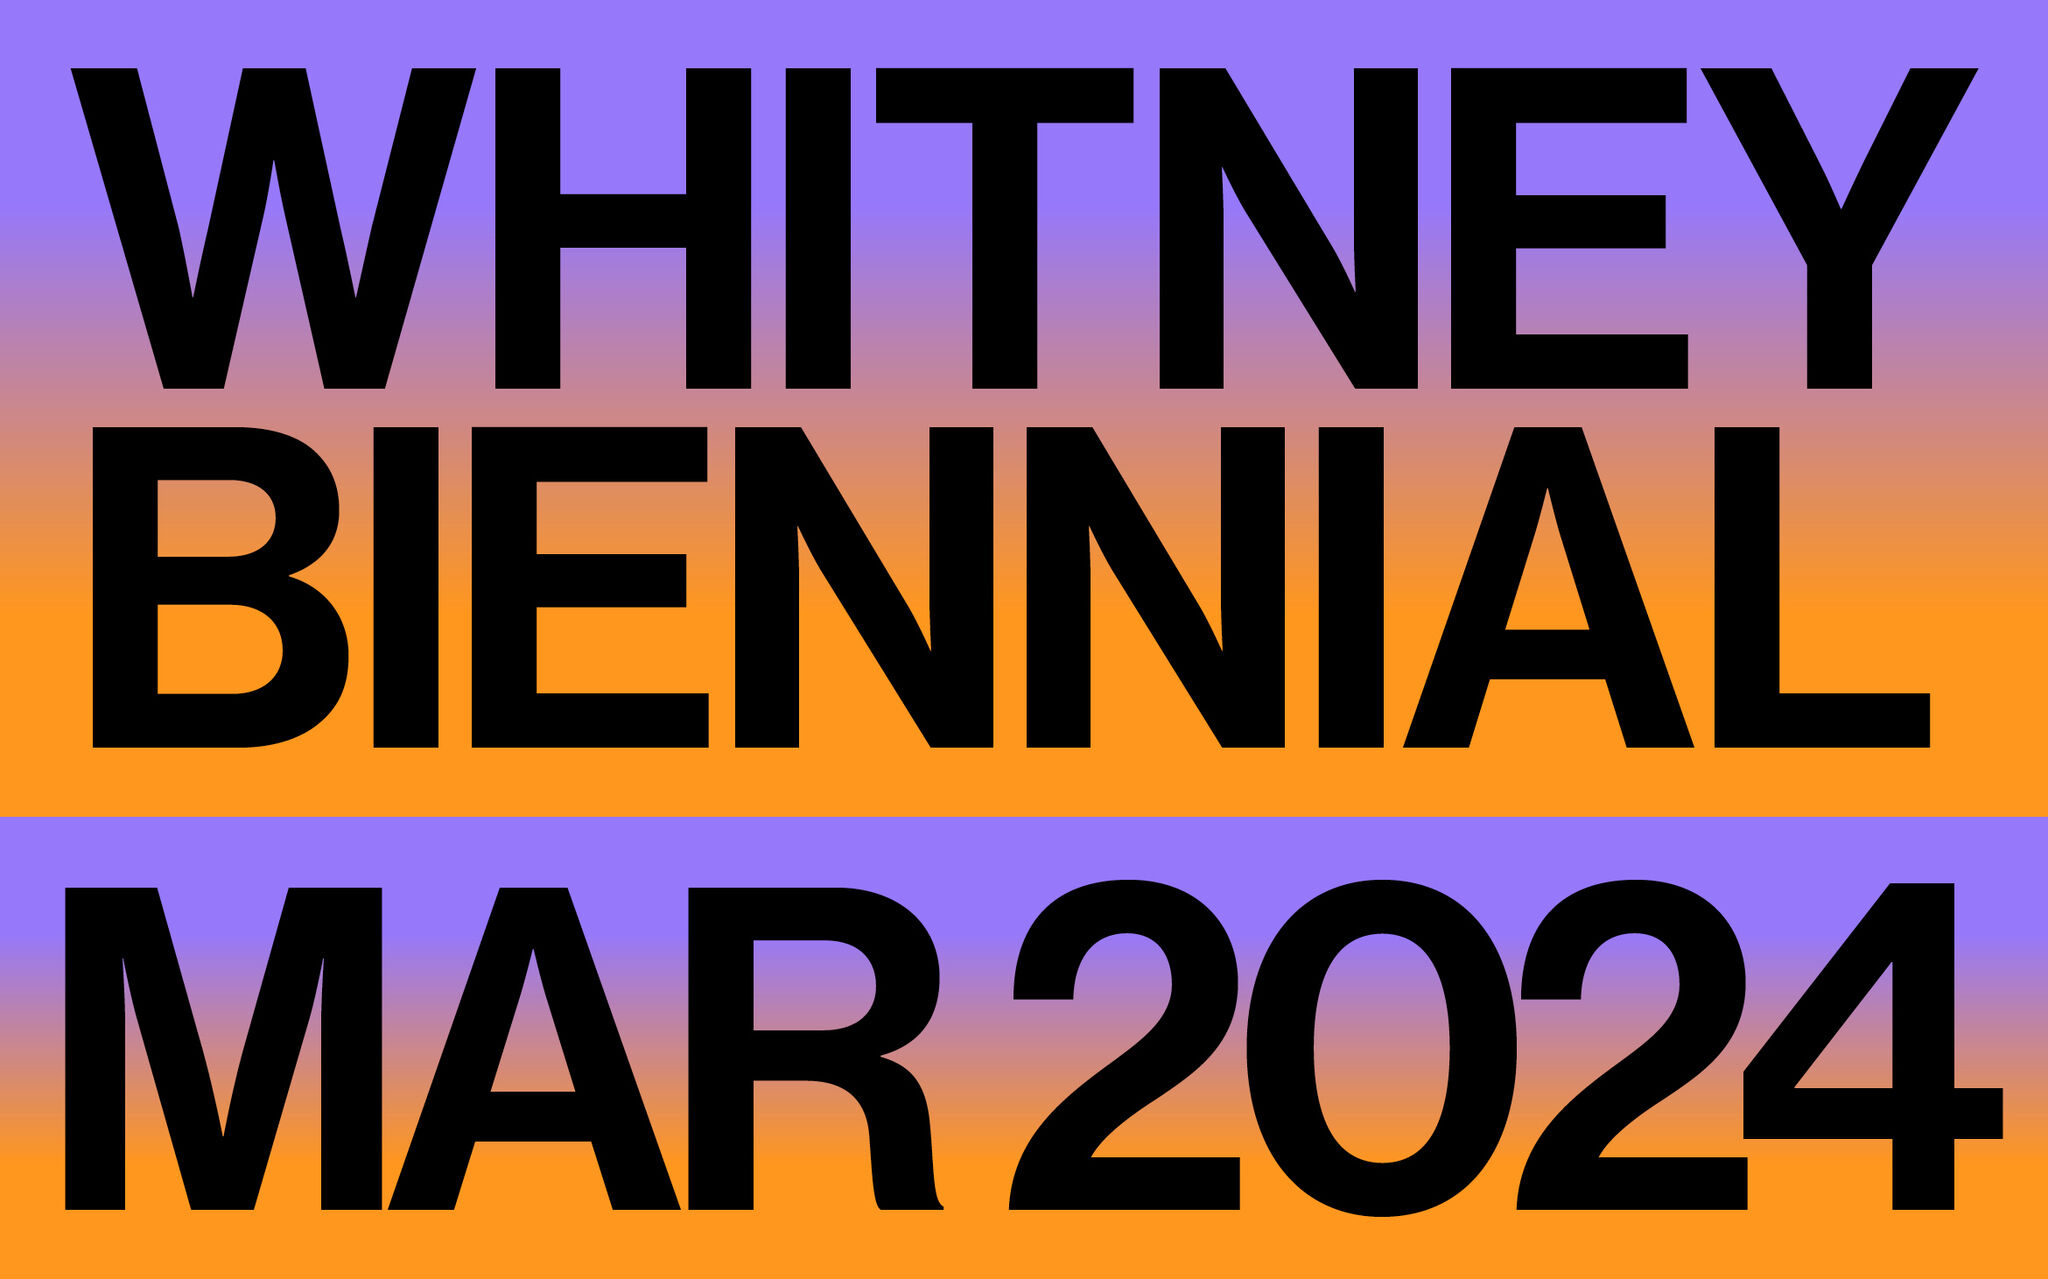 A graphic that reads "Whitney Biennial Mar 2024" with text overlaid on a background with orange and purple gradient. 